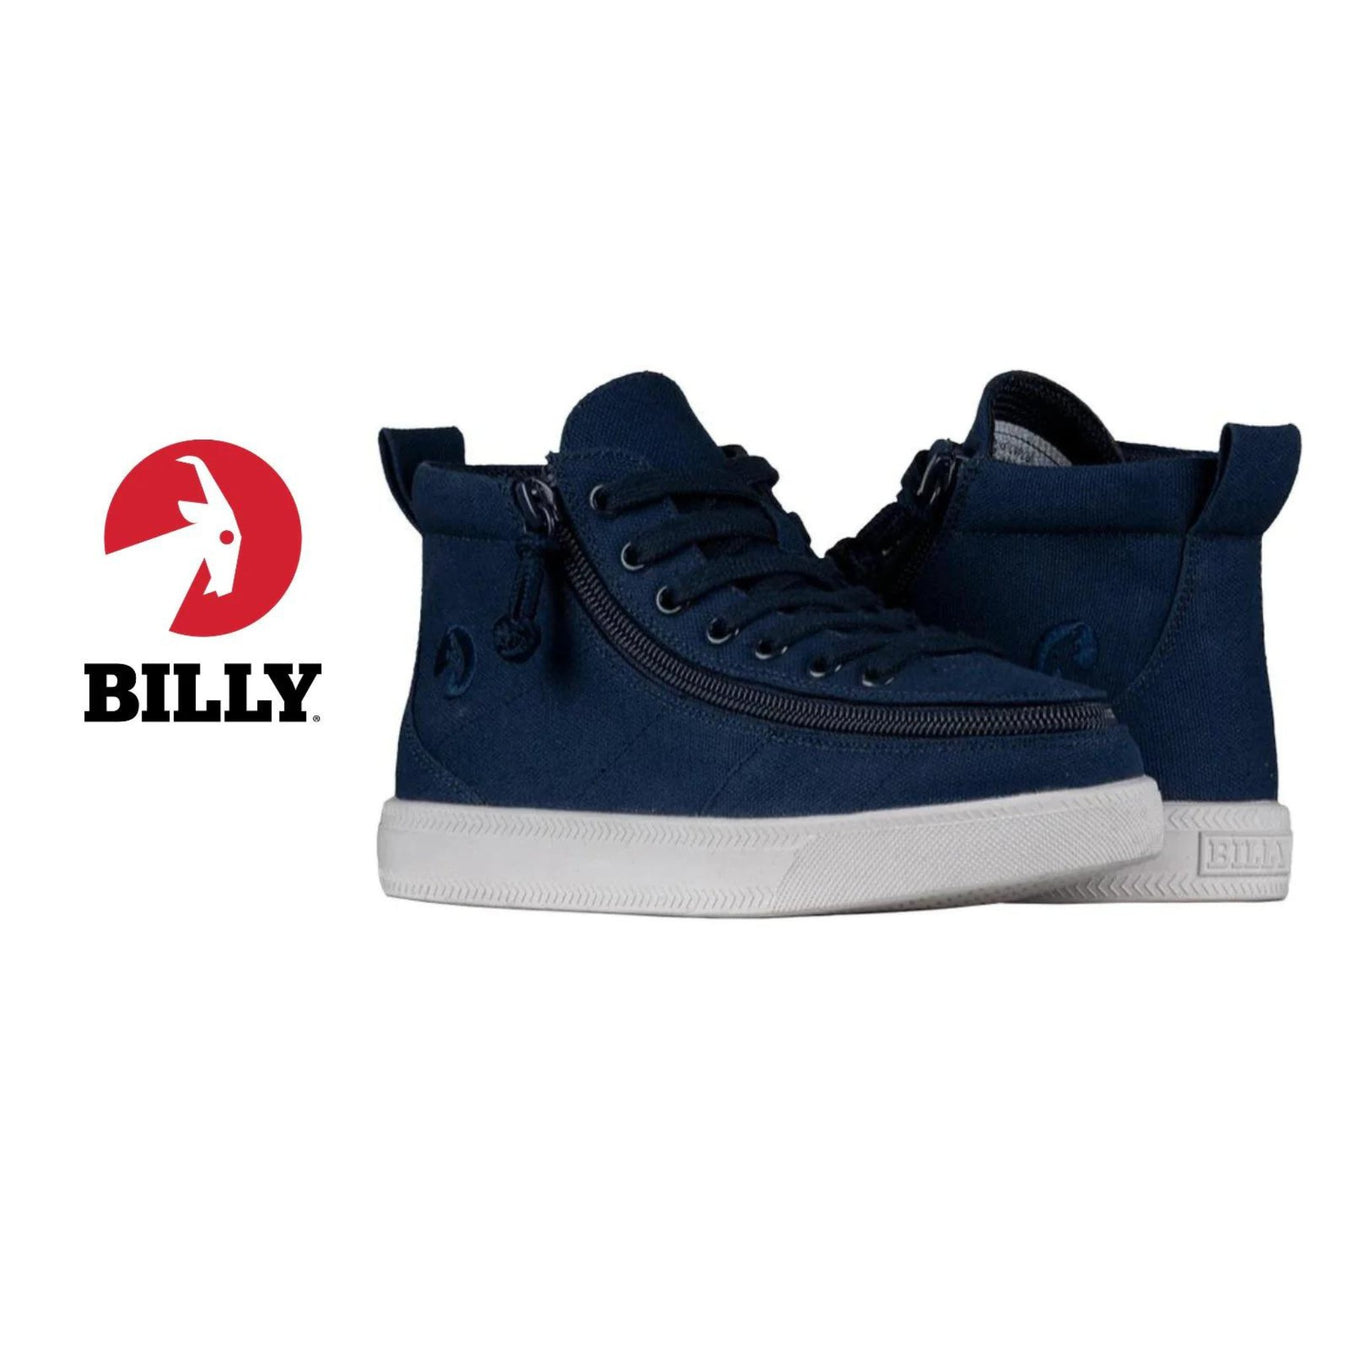 billy_footwear_shoes_for_toddlers_with_special_needs_children